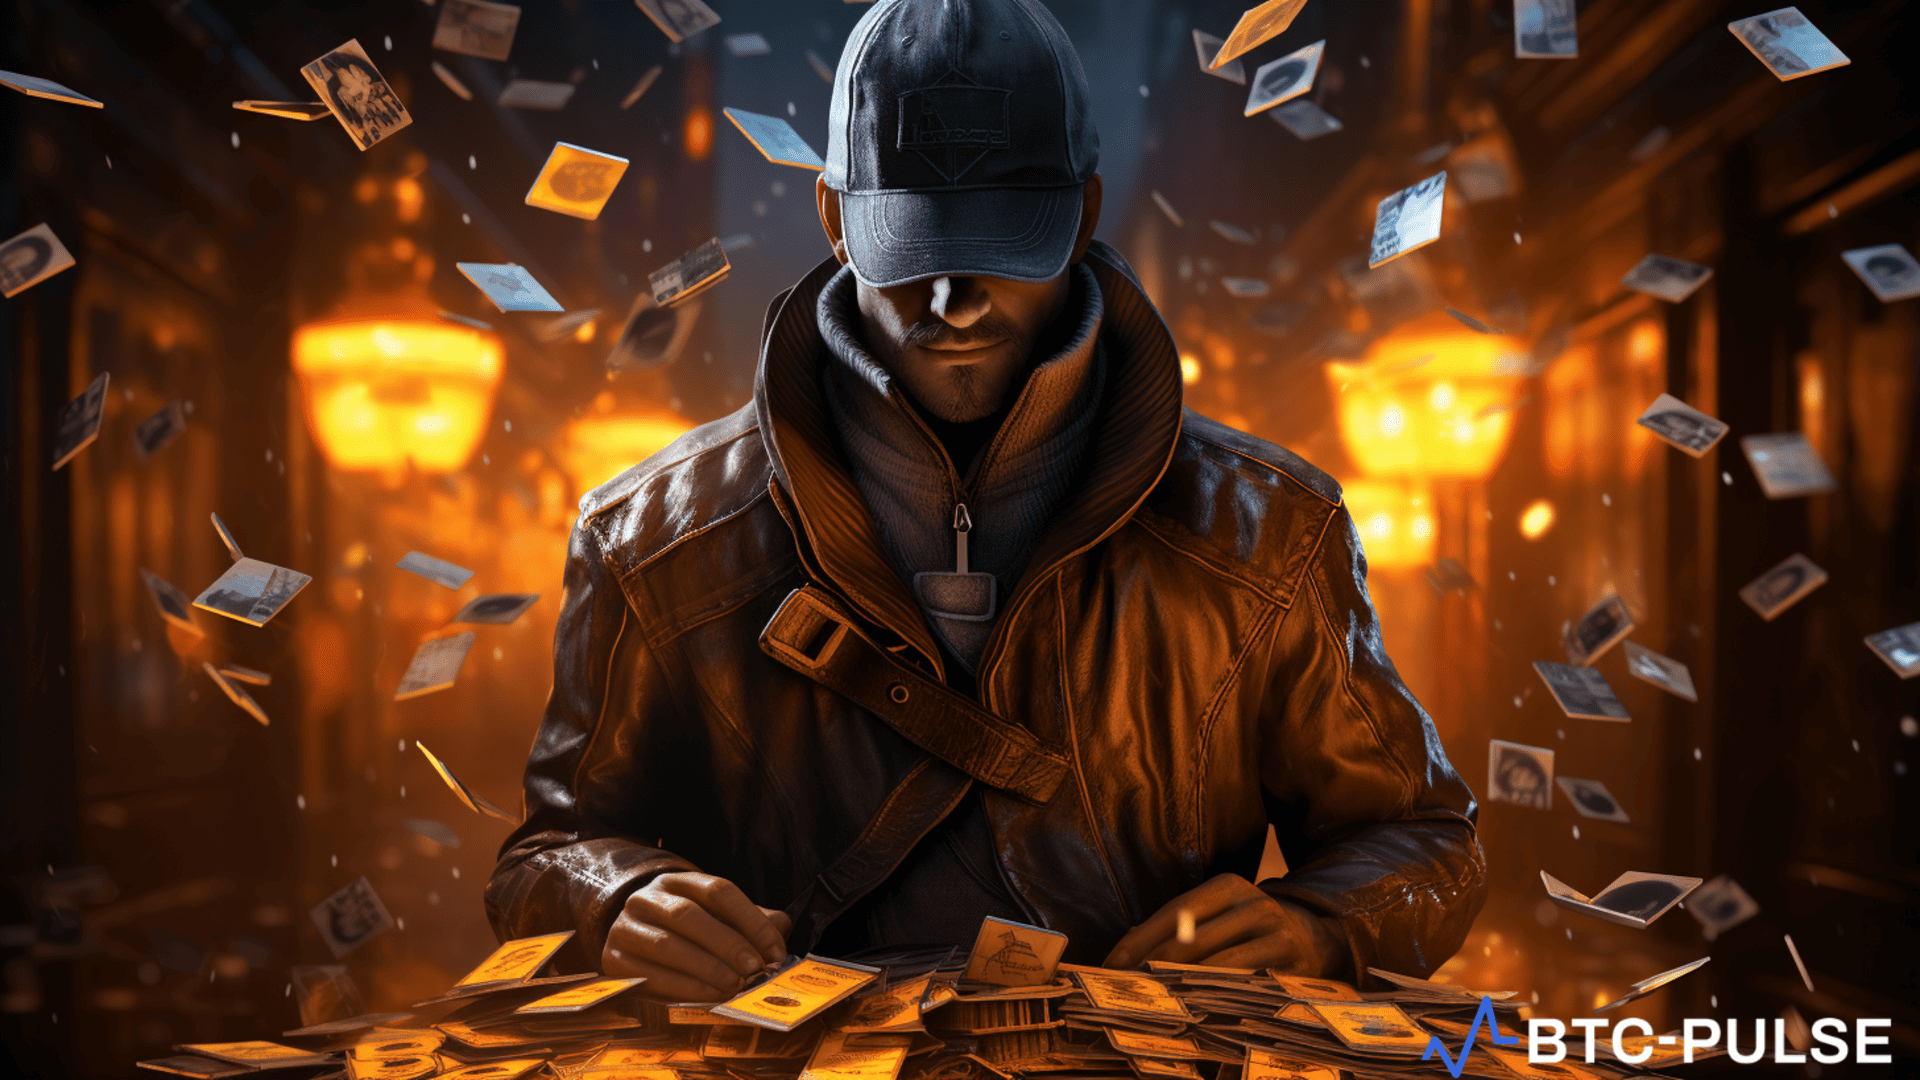 Ethereum’s Cross The Ages Partners with Ubisoft for Exclusive Watch Dogs NFT Cards